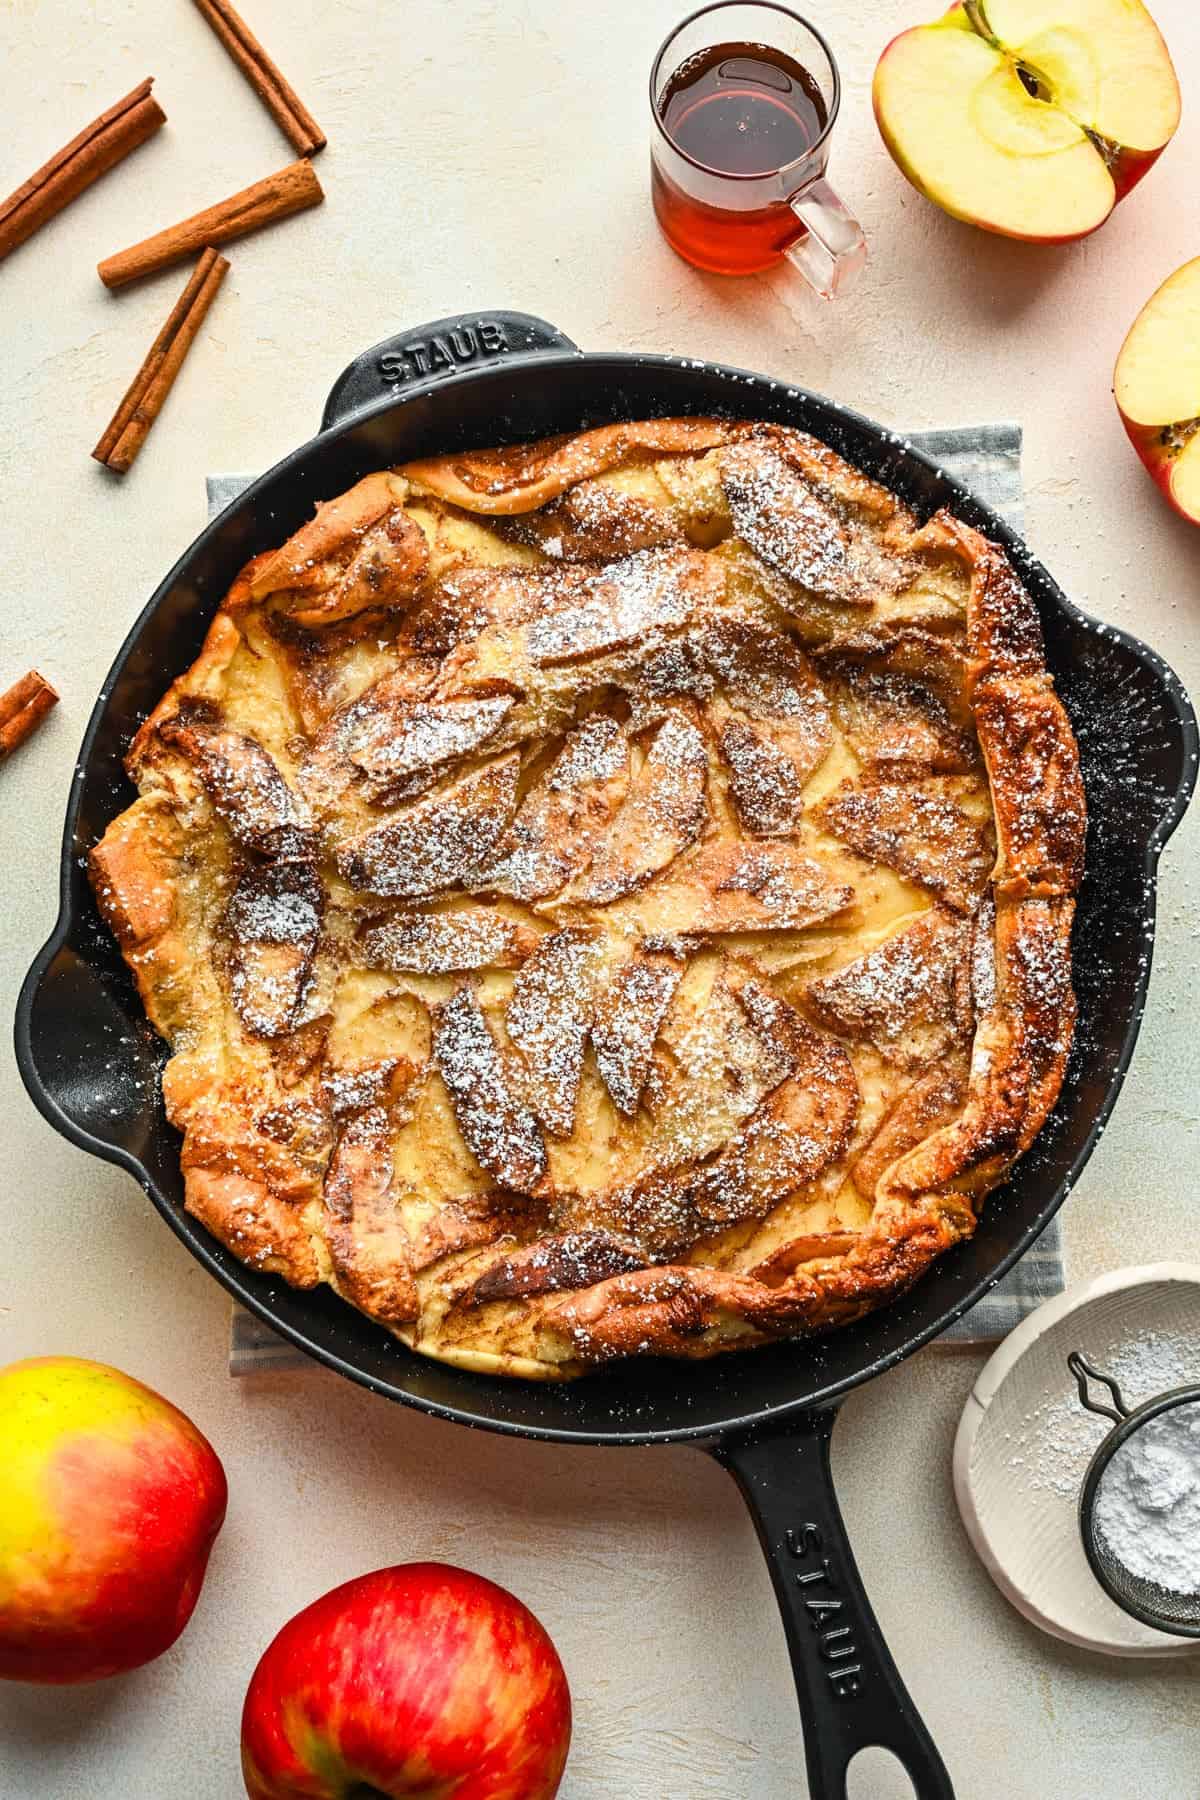 A photo of a German apple pancake in a cast iron skillet.